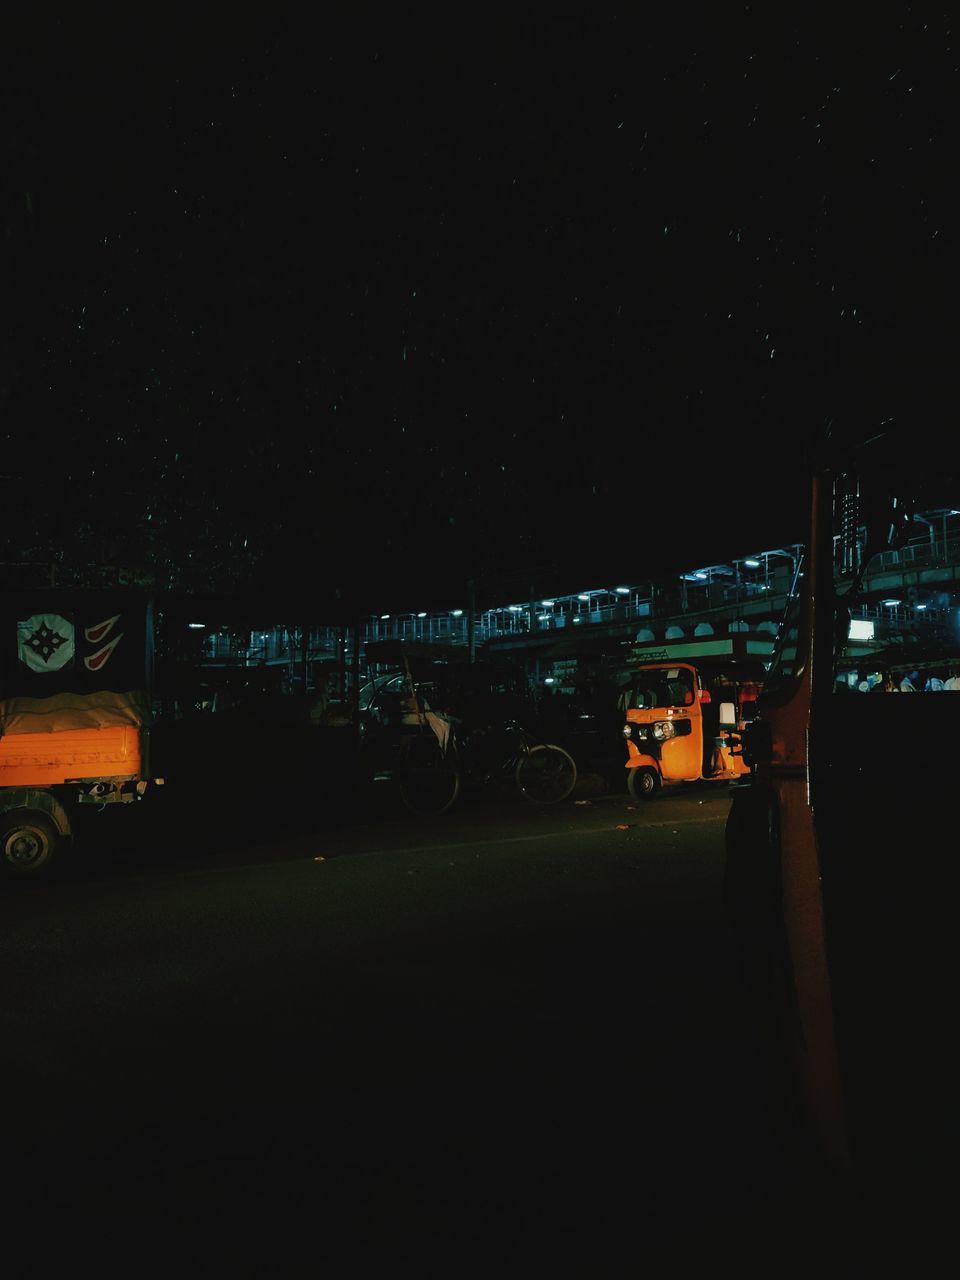 night, darkness, illuminated, sky, light, architecture, transportation, star, astronomical object, nature, mode of transportation, no people, built structure, city, land vehicle, vehicle, car, midnight, building exterior, motor vehicle, space, dark, outdoors, road, street, astronomy